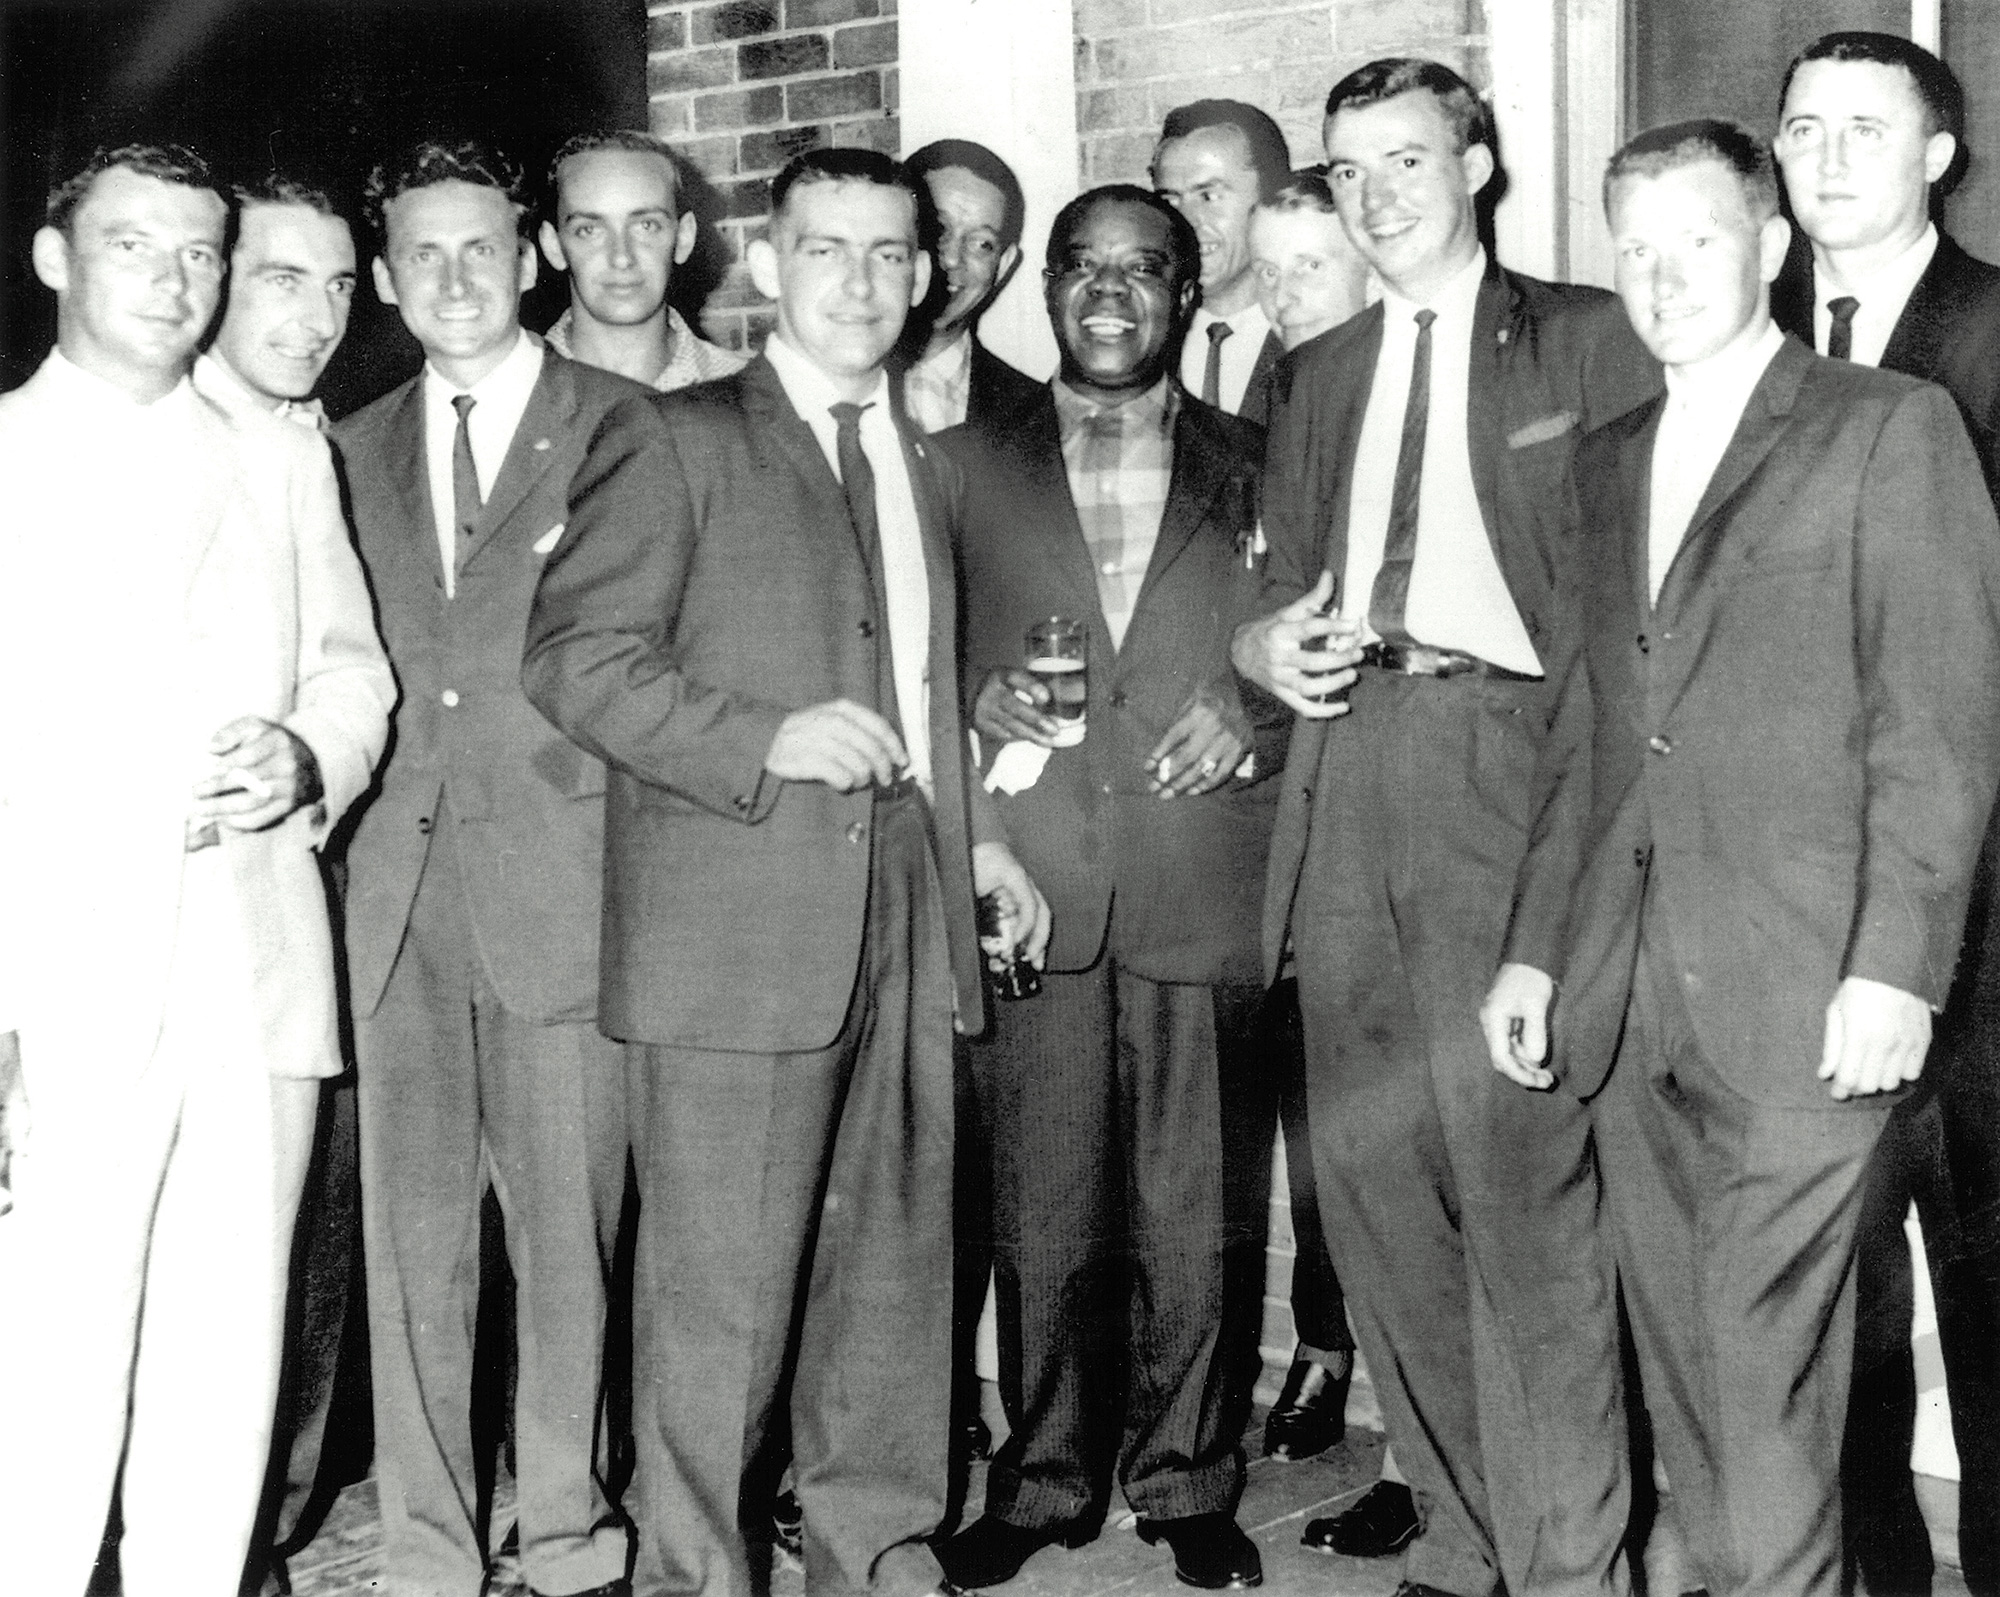 Louis Armstrong in Collingwood. Left to right: Dee Dee Bryan, T.J. Brown, unknown, Wayne Hartle, Buddy Brown, Trummy Young, Louis Armstrong, unknown, John Sheffer, Frank Bryan, Roger Lockhart, David Christie.